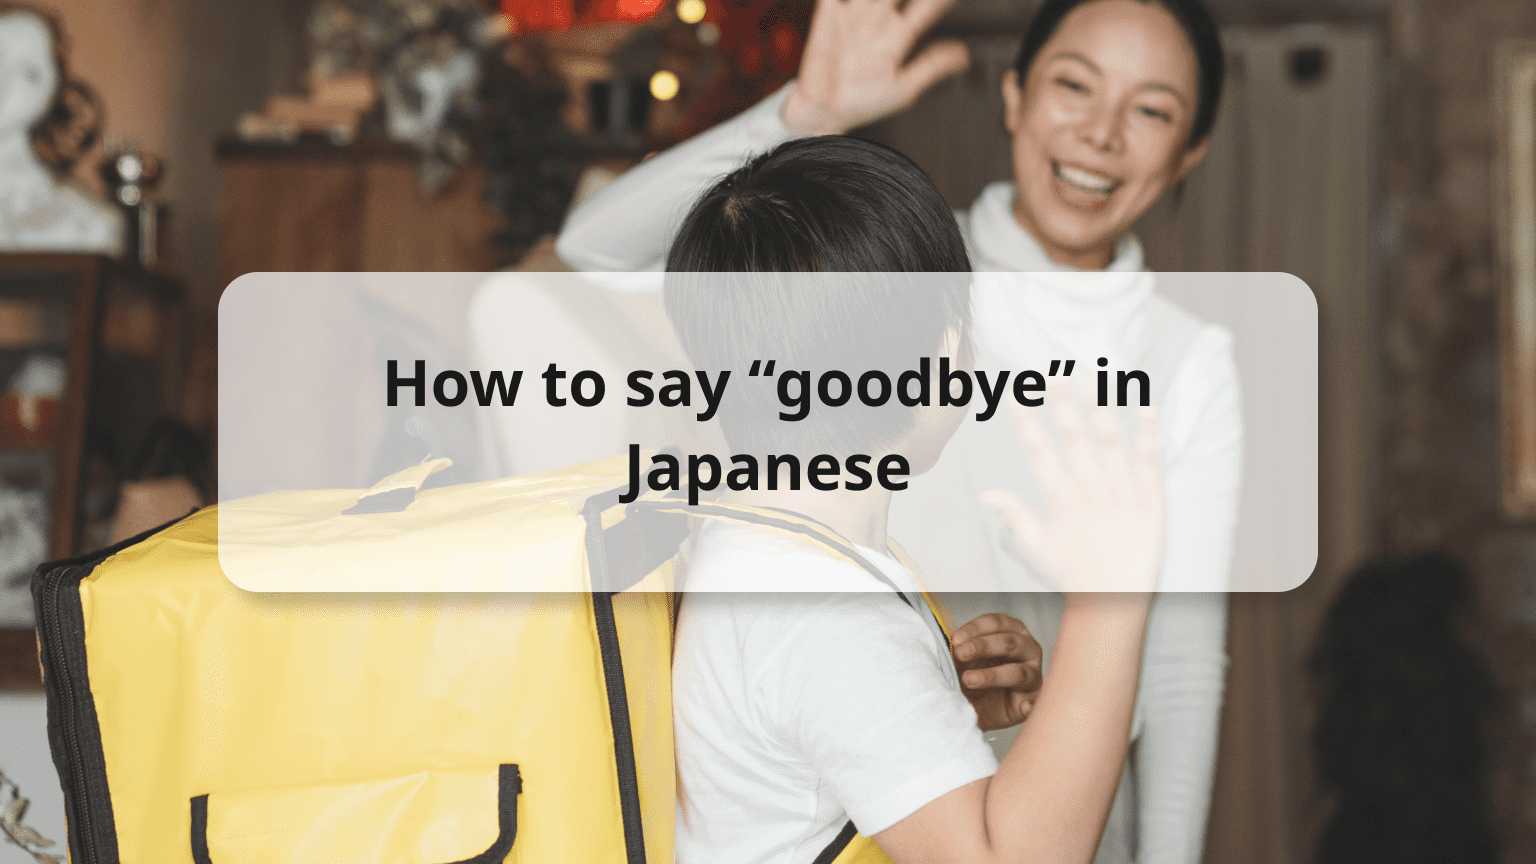 20 Ways to Say "Goodbye in Japanese" - Formal & Casual